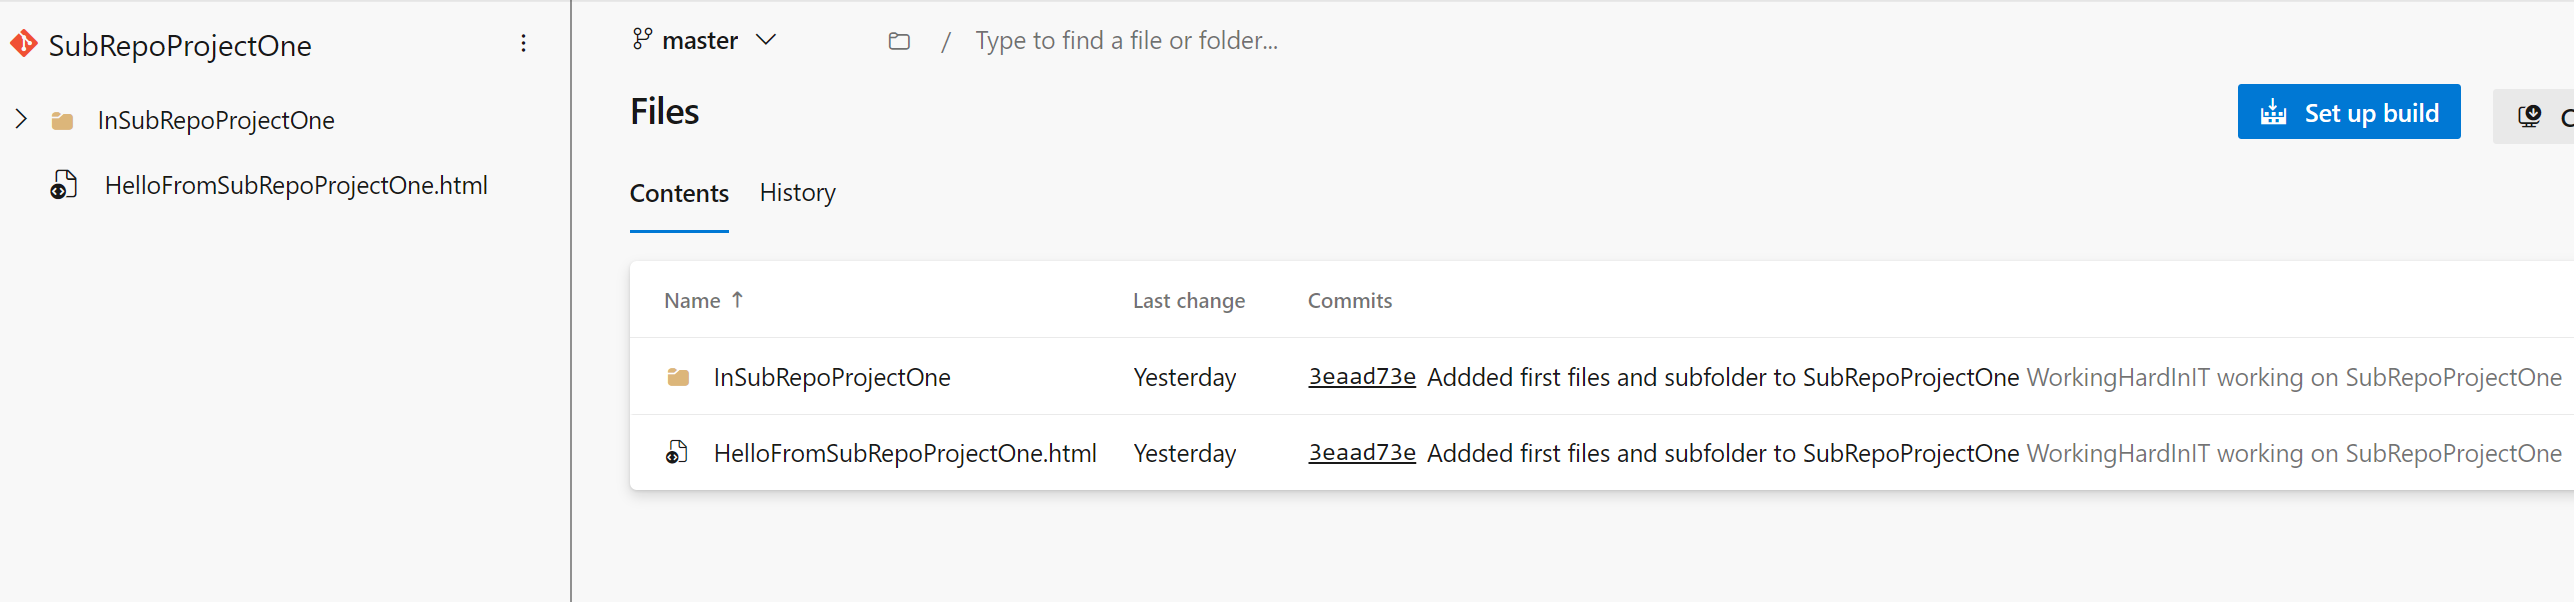 The files and folders we created are not there yet, as our commit and push in the main repository did not touch that.